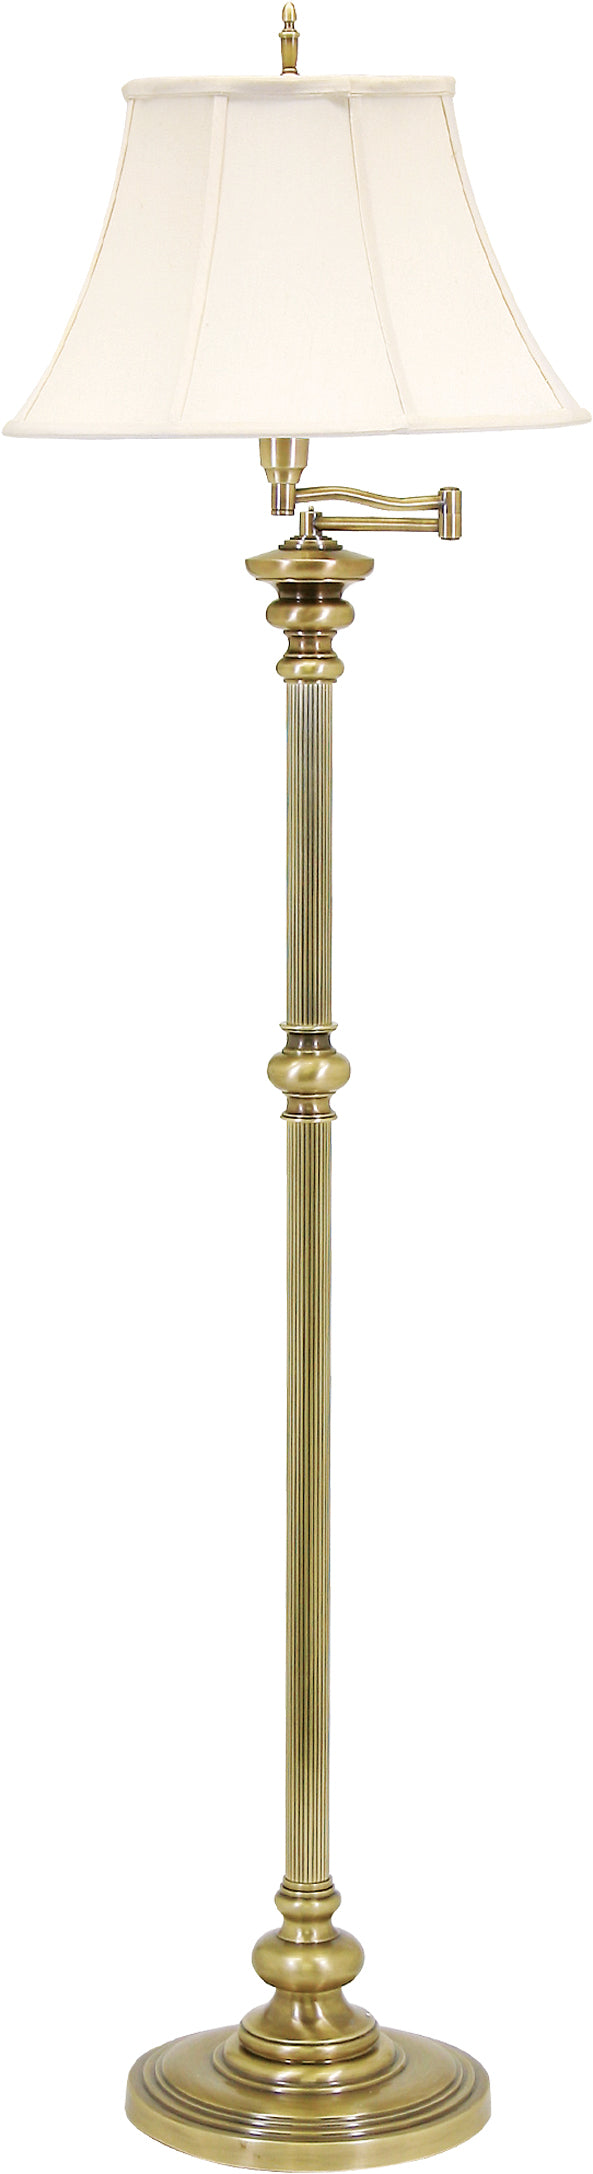 House of Troy Newport 61" Antique Brass Floor Lamp N604-AB